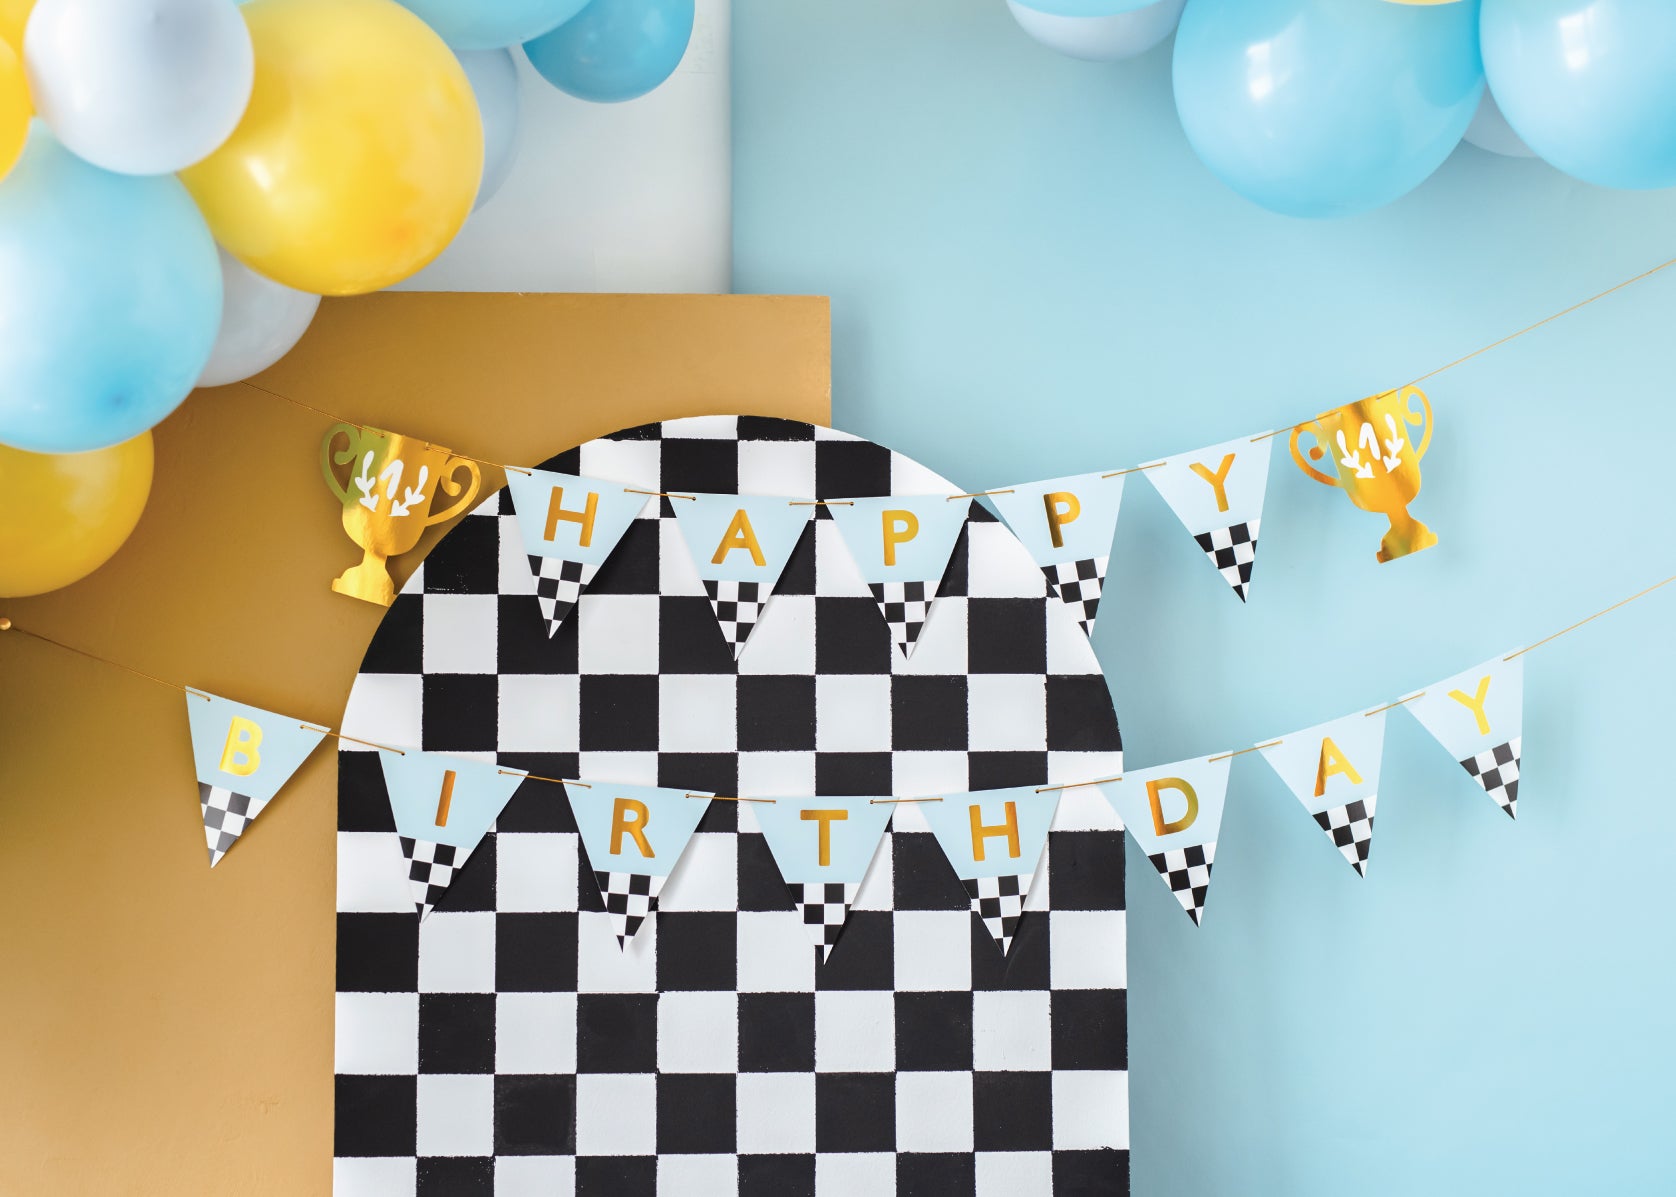 Racing Trophy Happy Birthday Pennant Banner 8ft | The Party Darling